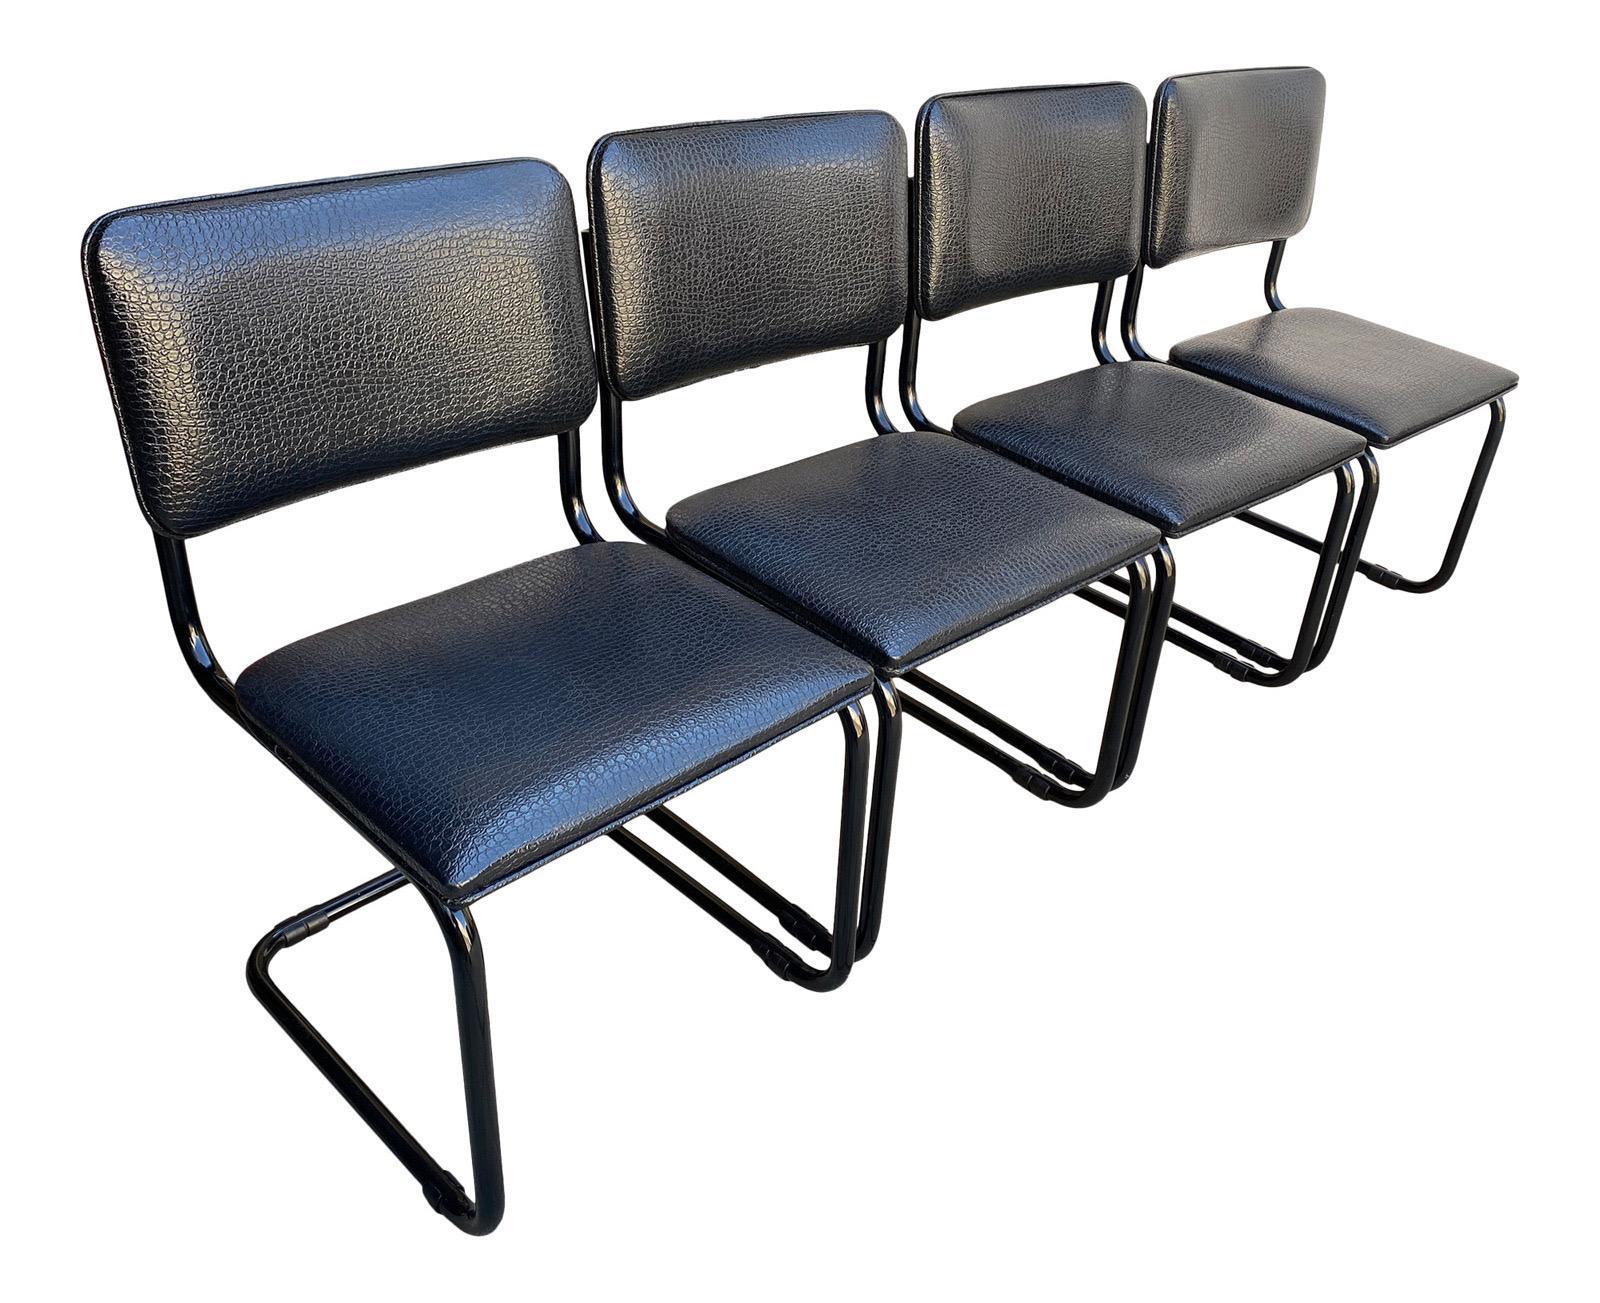 1980s Postmodern Faux Alligator Cantilever Dining Chairs Set of 4 In Good Condition For Sale In Bensalem, PA